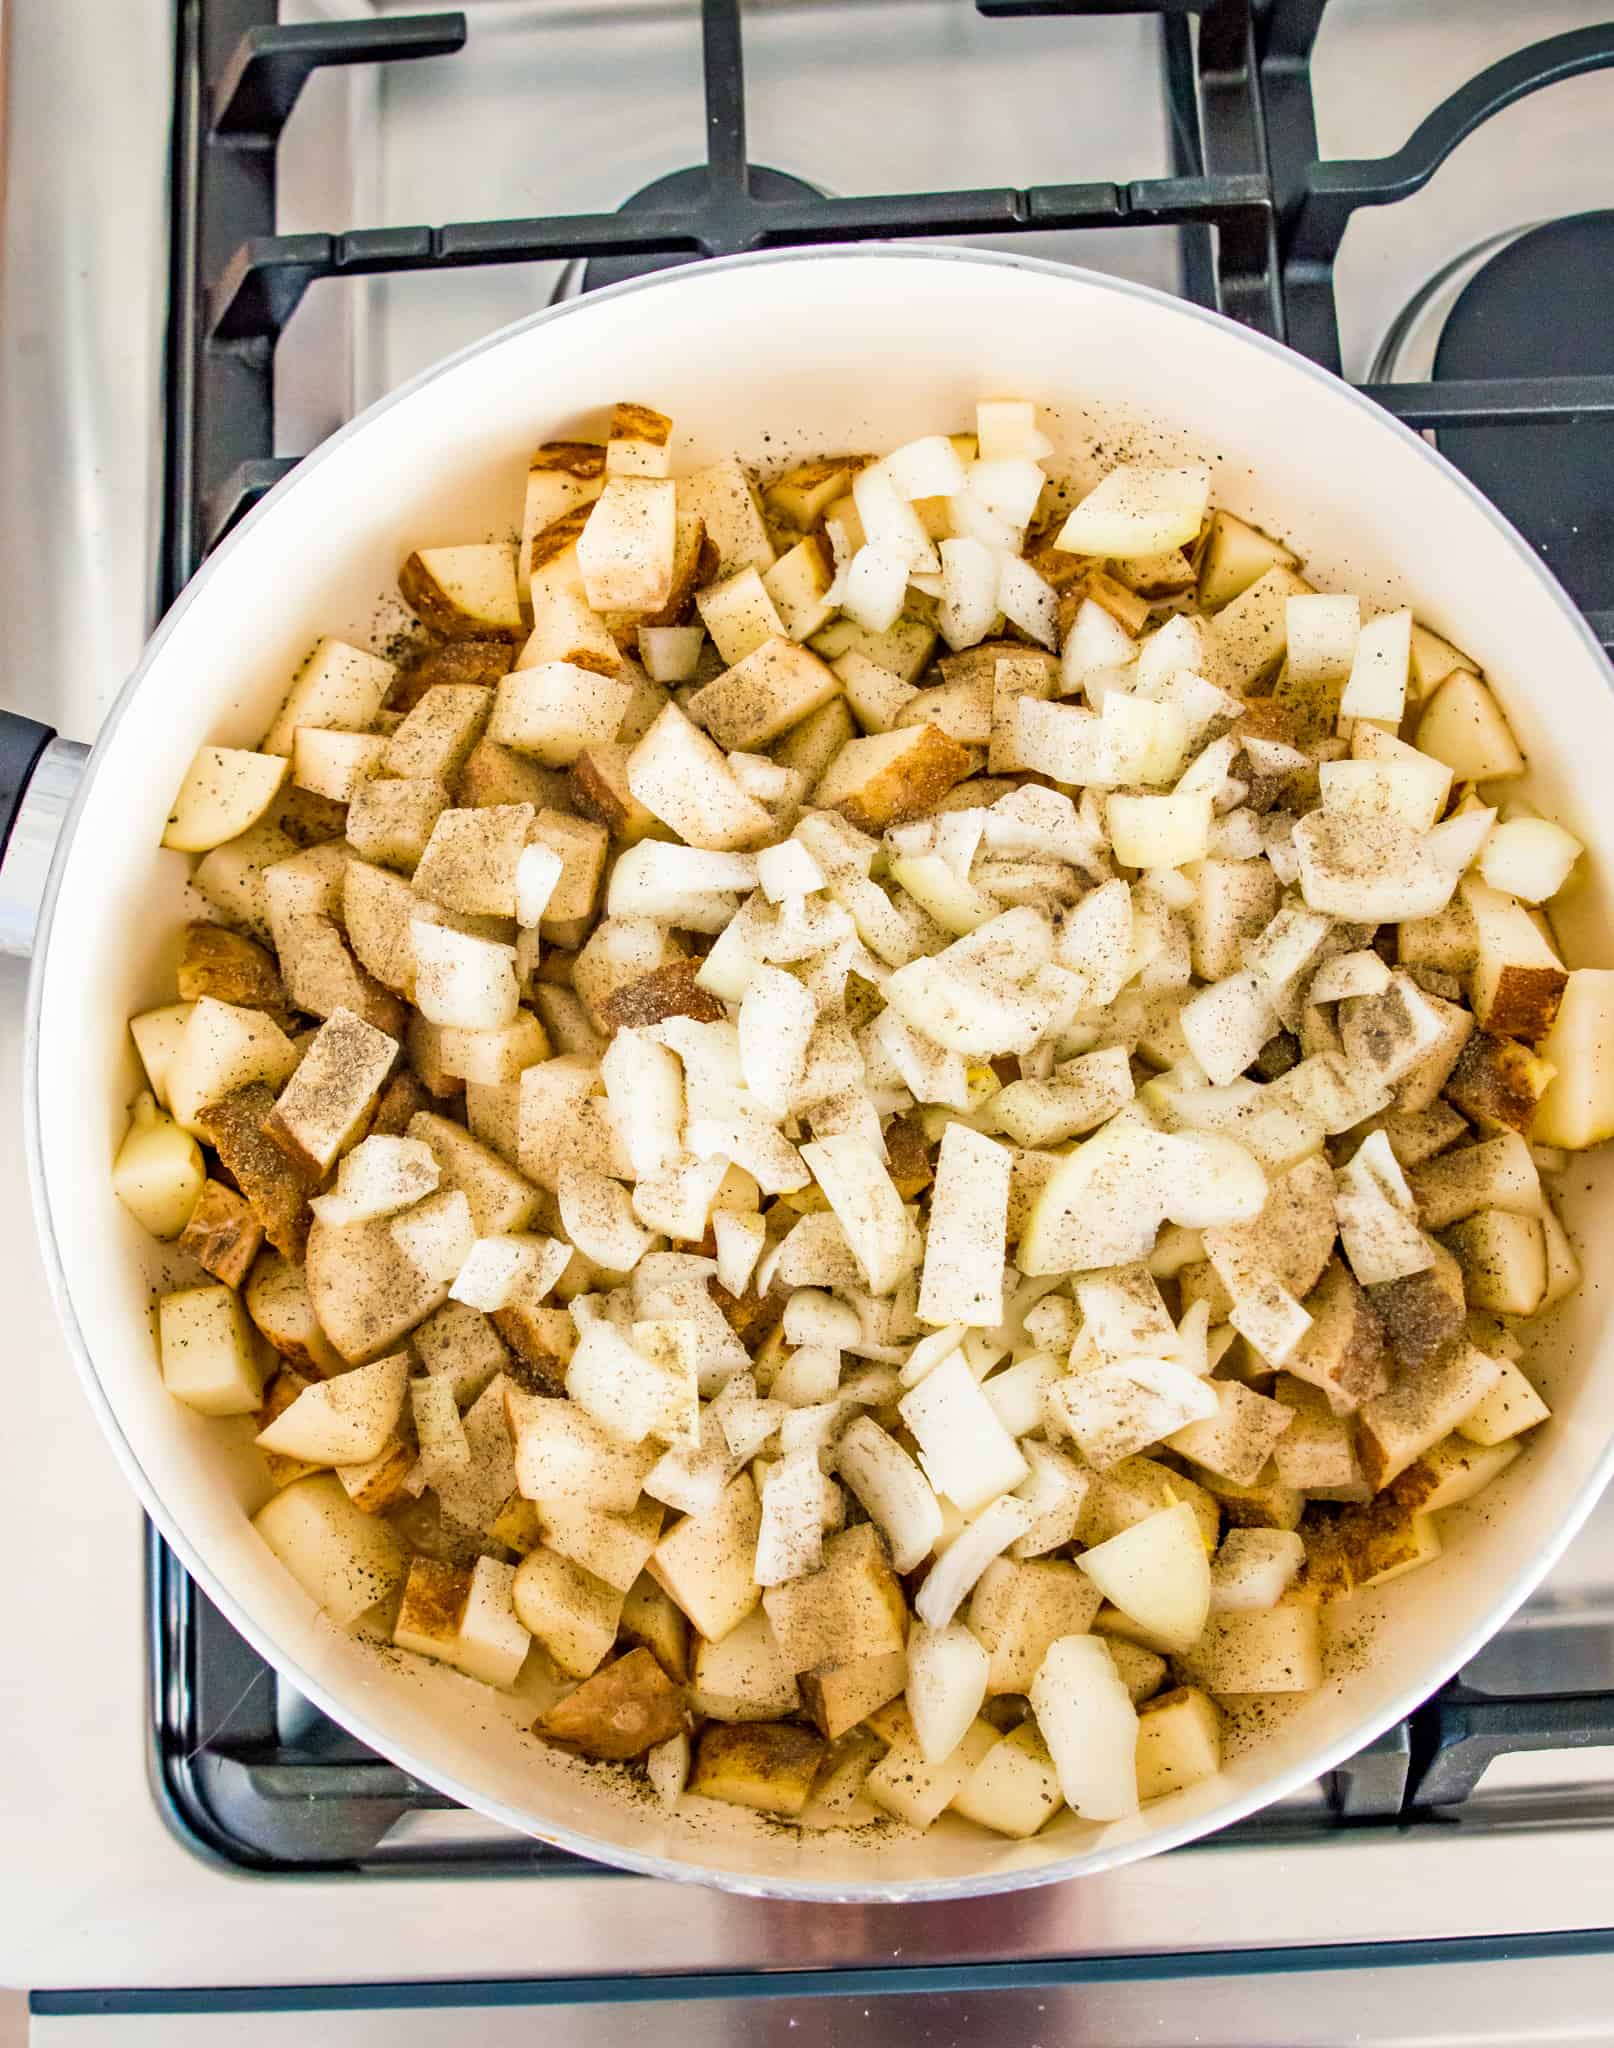 Chopped potatoes and onions being cooked in a skillet on the stovetop.